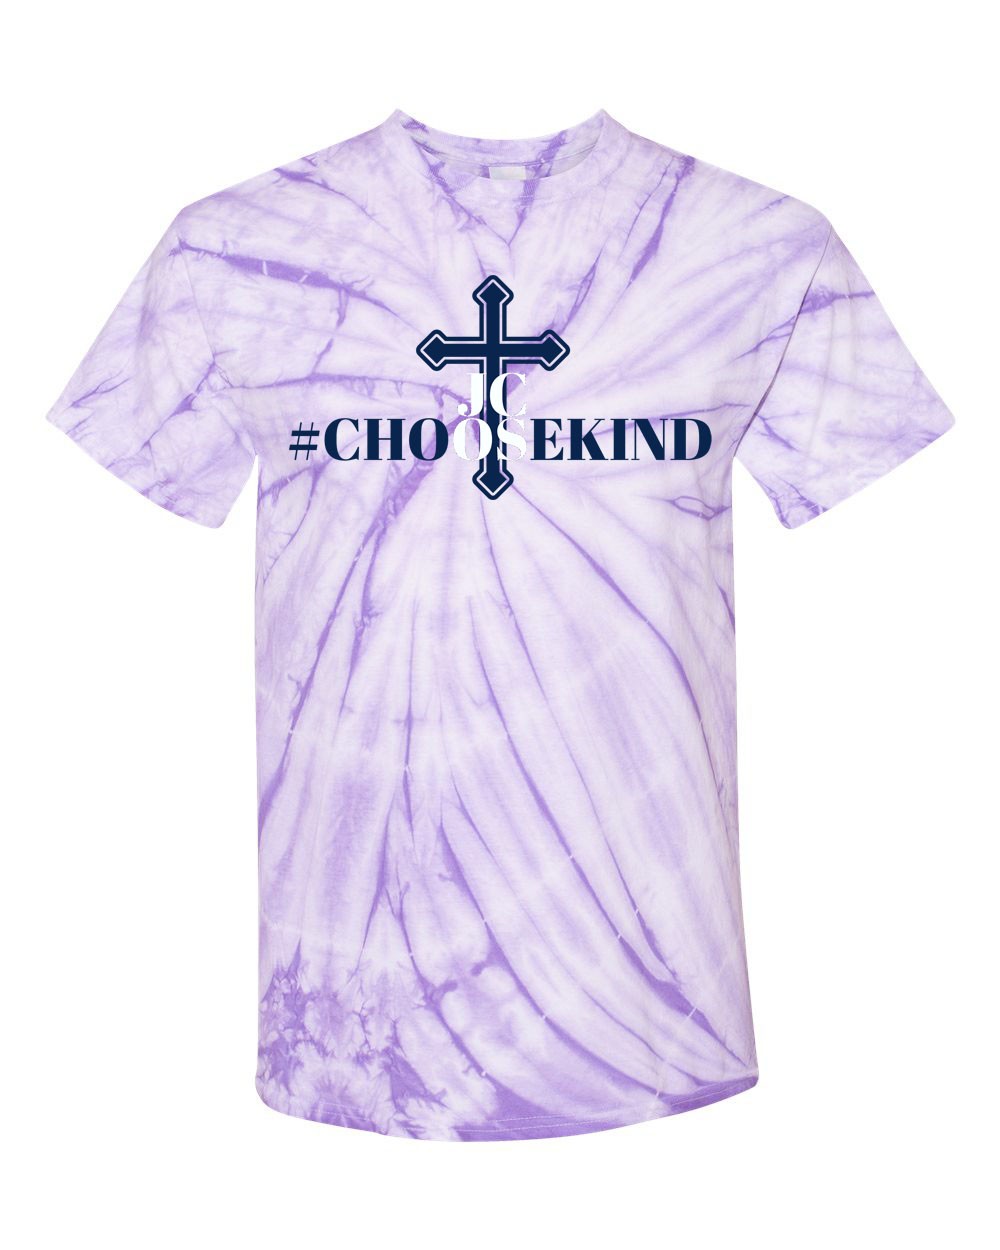 JCOS Staff S/S Tie Dye T-Shirt w/ Choose Kindness Logo #F19-F25 - Please Allow 2-3 Weeks for Delivery